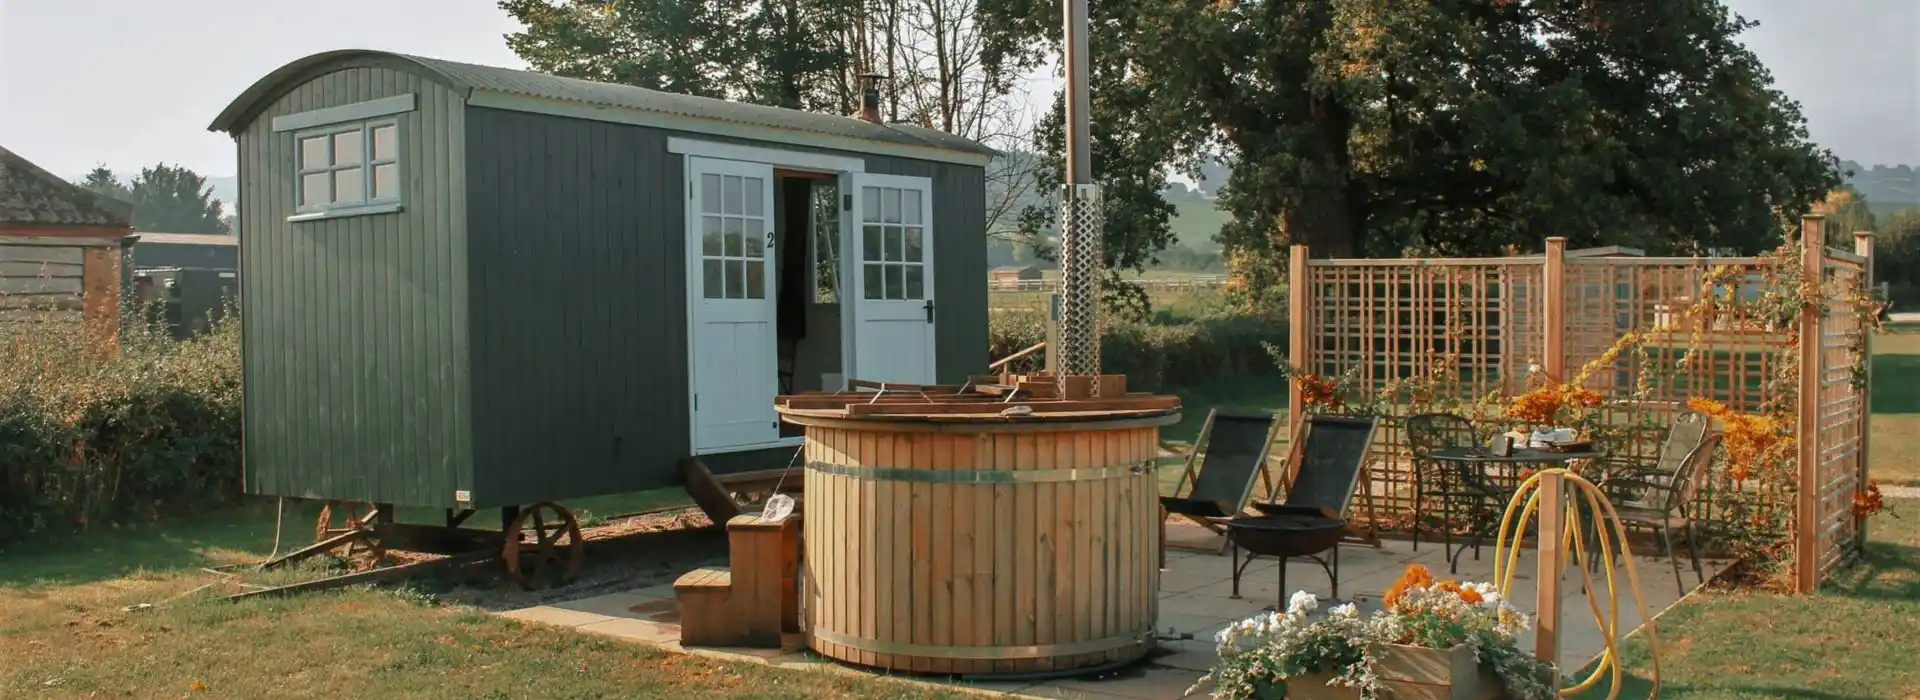 Shepherd's hut holidays with hot tubs in Cornwall